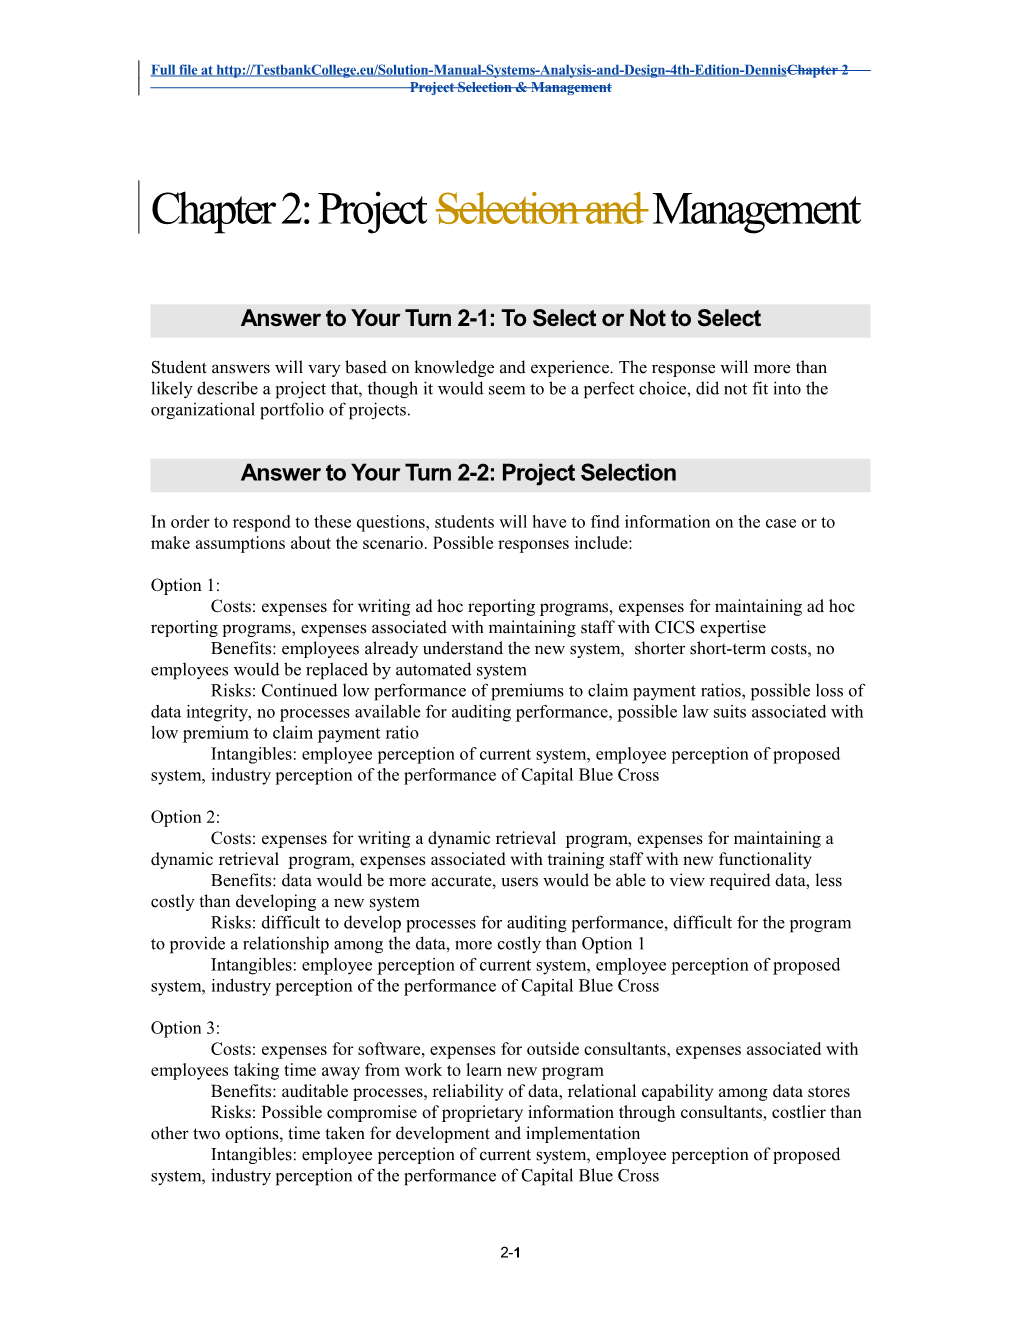 Chapter 2: Project Initiation